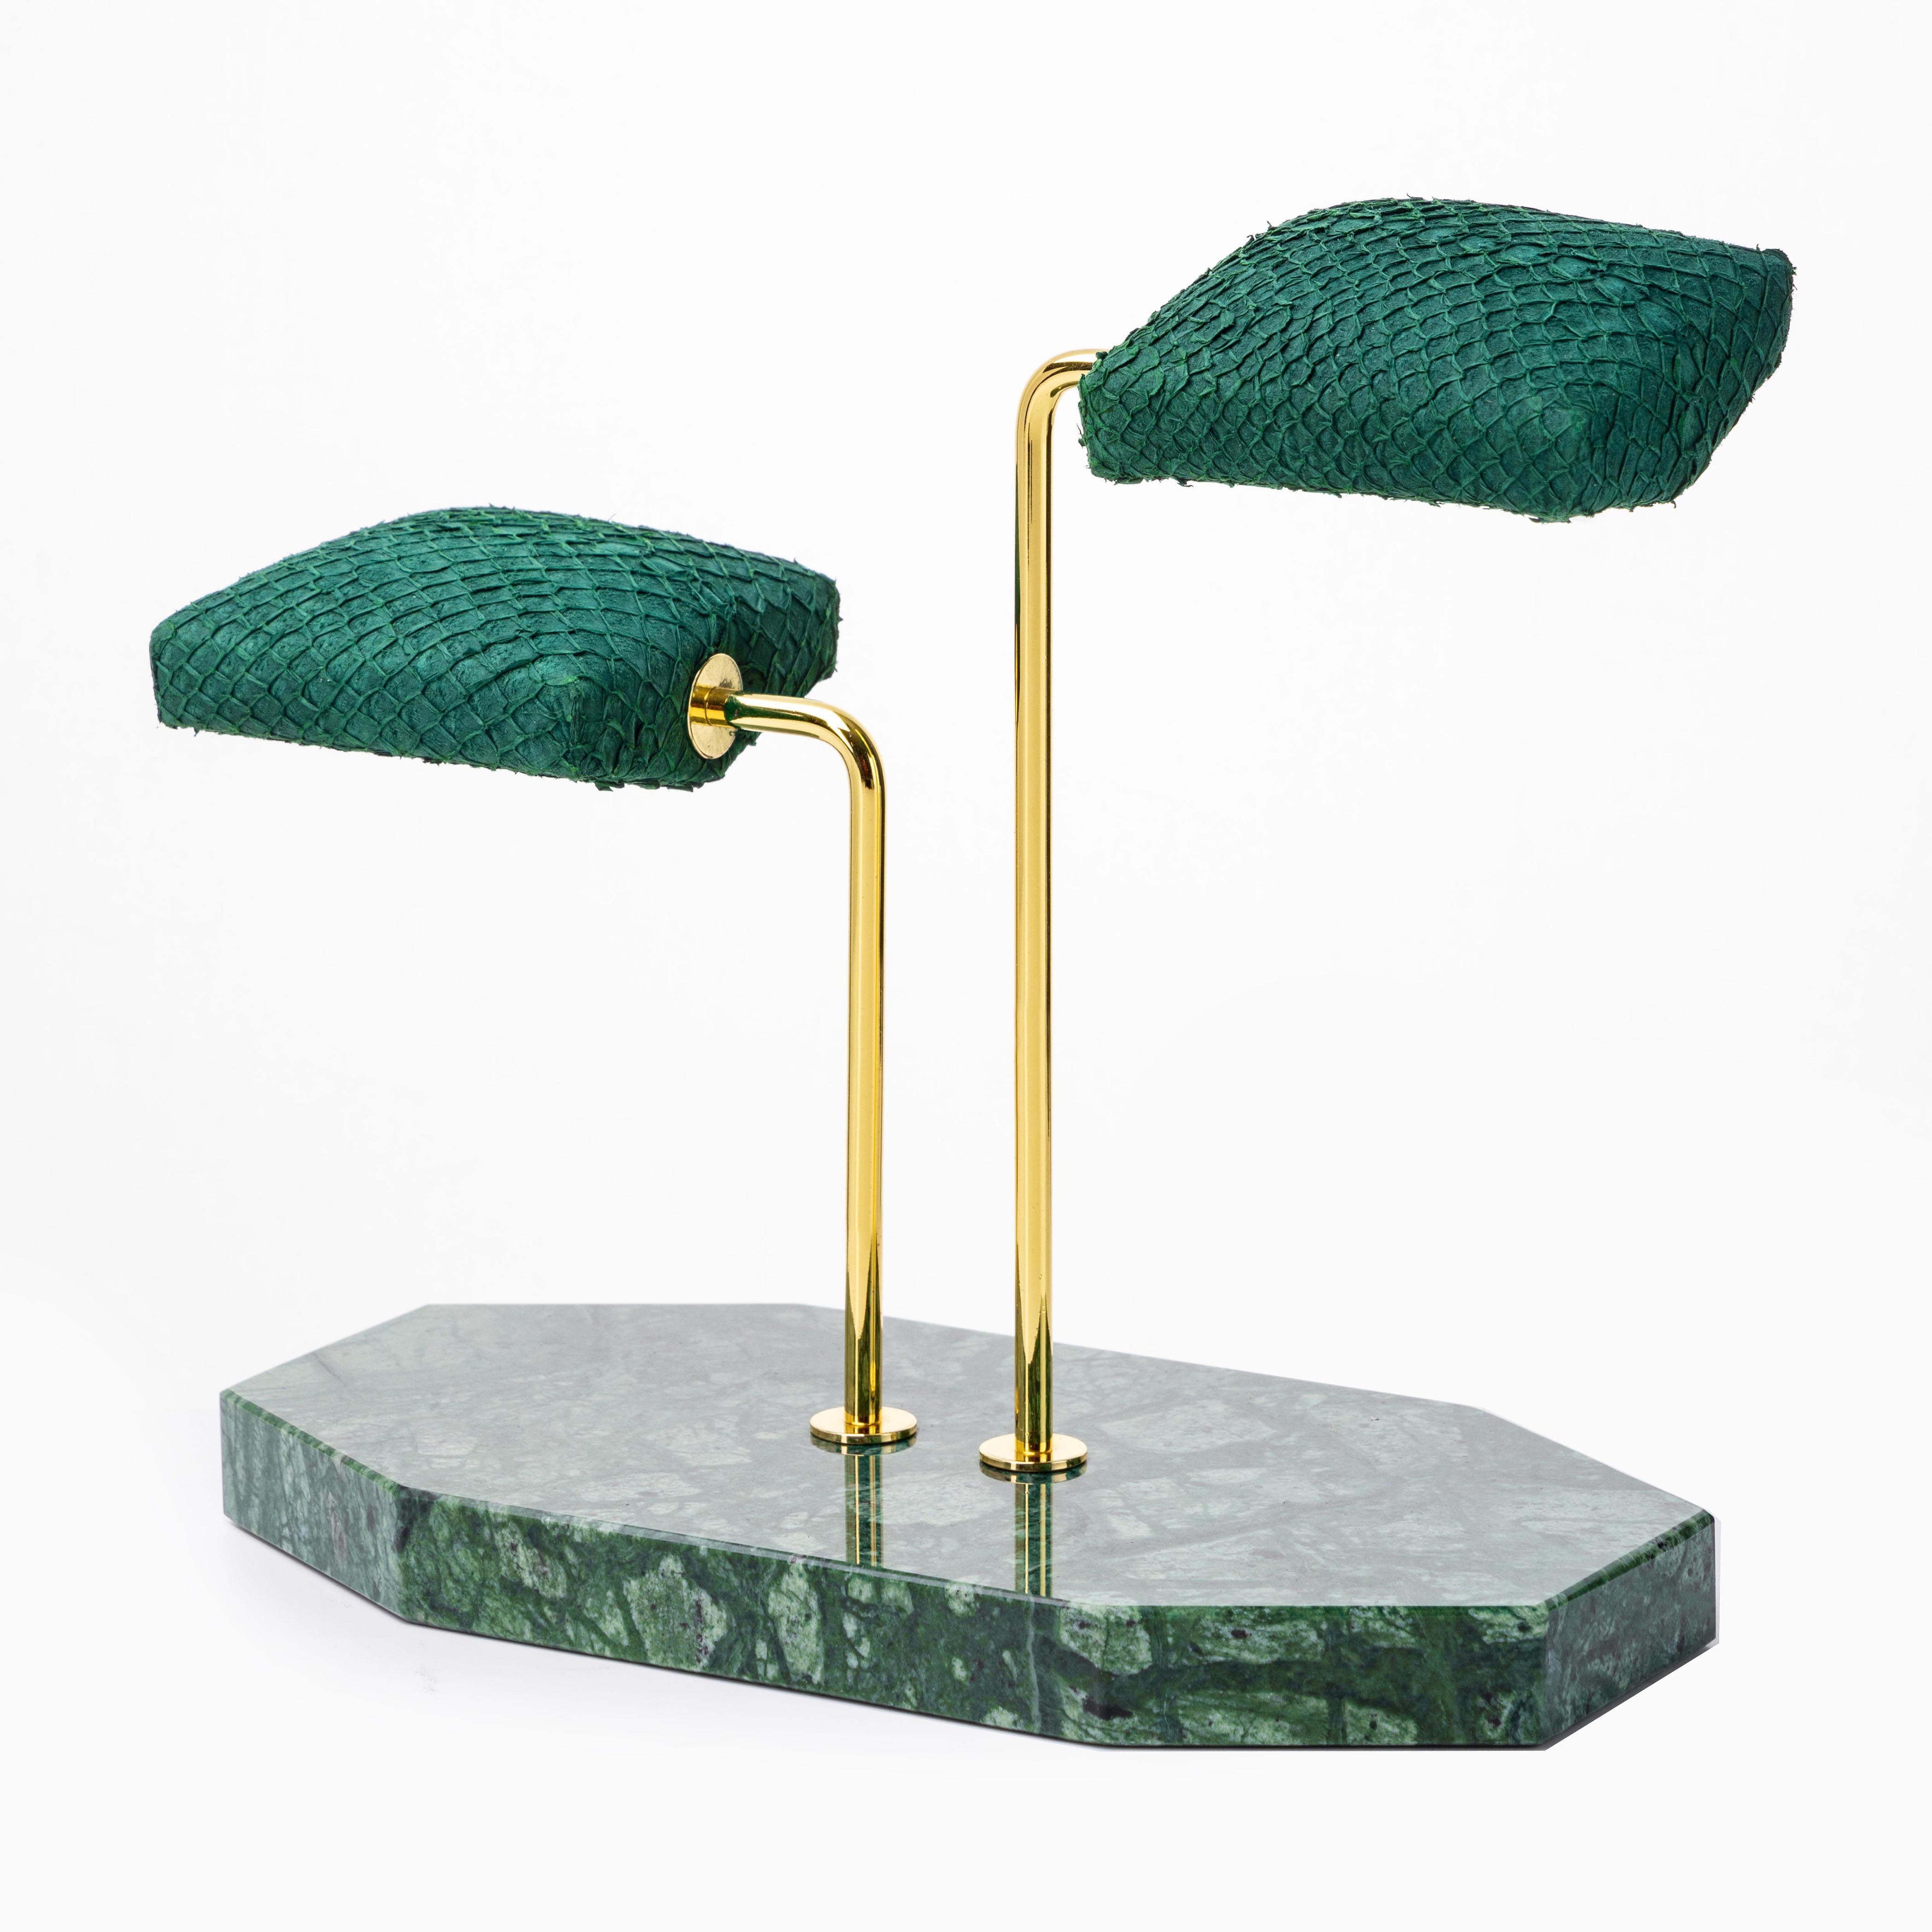 Dual Watch Stand - Green Salmon (Limited Edition)